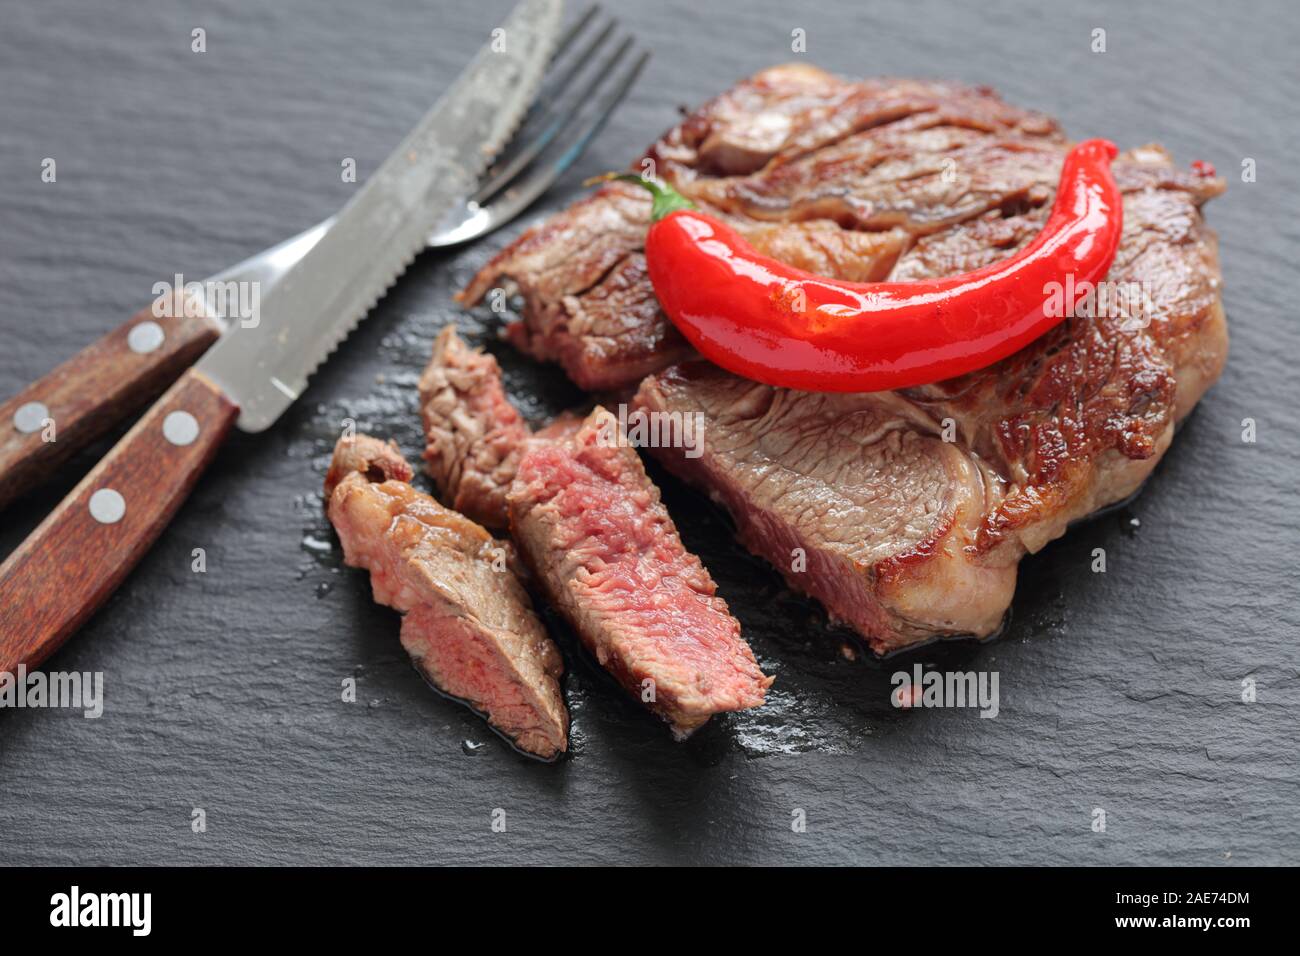 Sliced medium rare beef steak topped with roasted chili pepper on a slate tray closeup Stock Photo